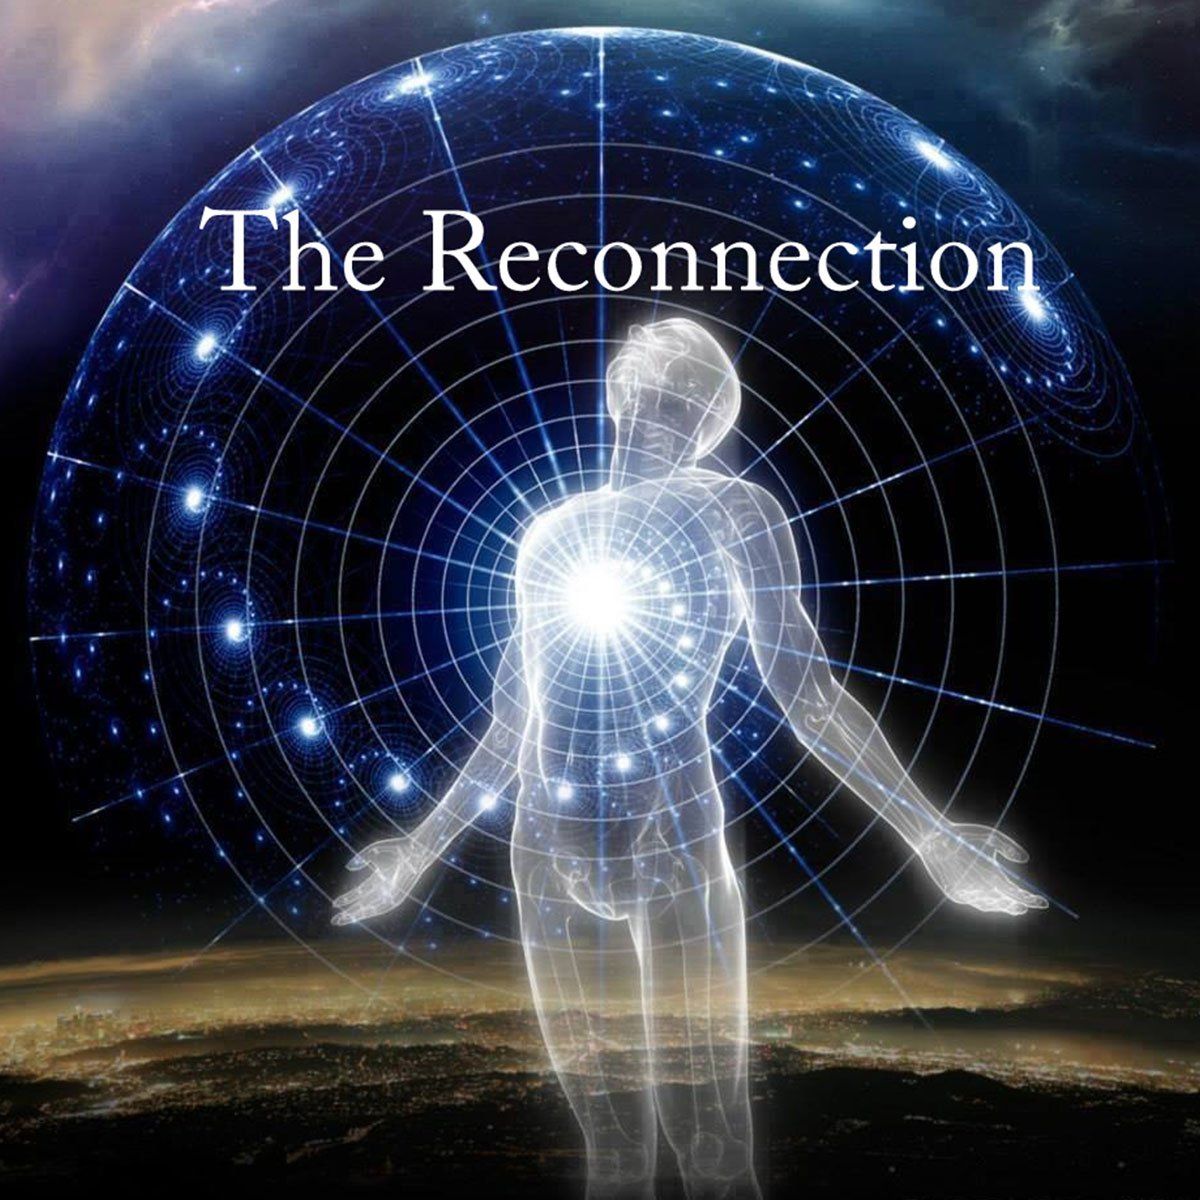 Reconnective Healing is a powerful axiatonal realignment that reconnects our 3-D meridian system with the 5-D meridian/circulatory system. We’re connecting to the deeper, grander, vaster part of who we are, our true Self that has always resided inside of us.